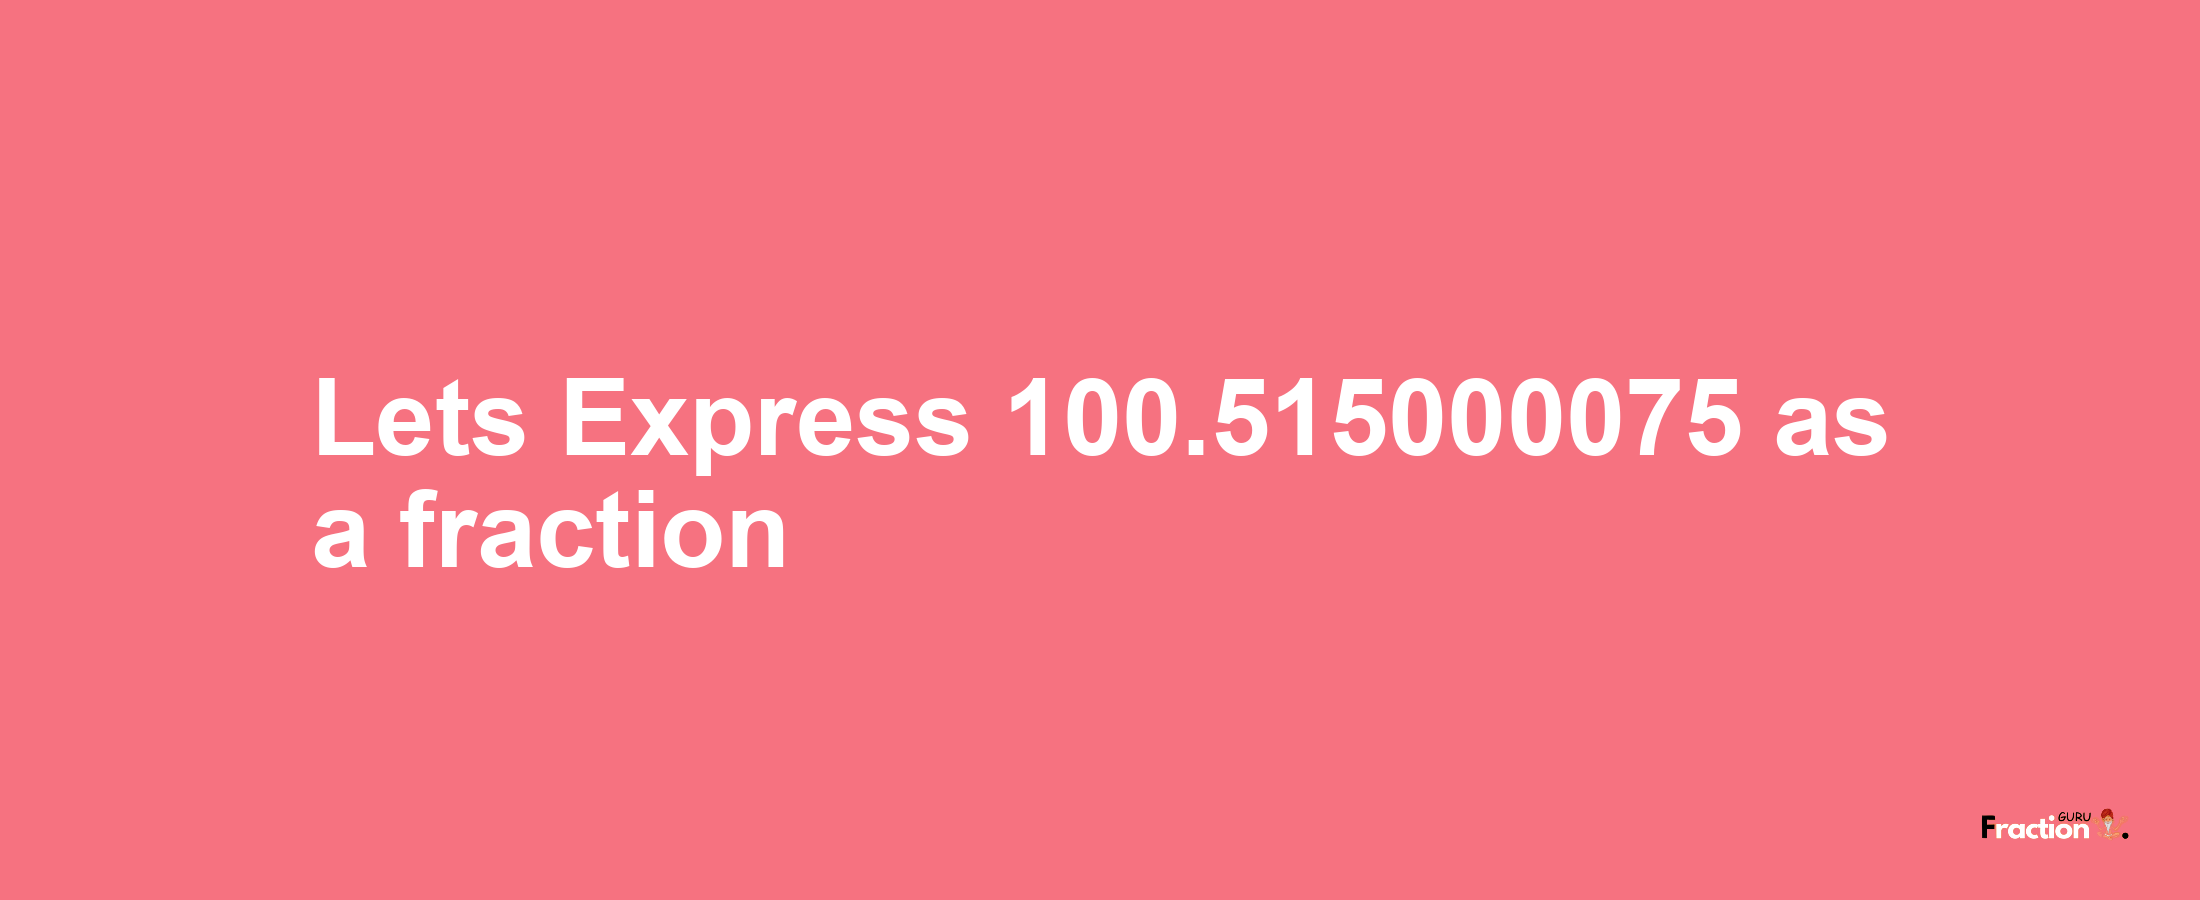 Lets Express 100.515000075 as afraction